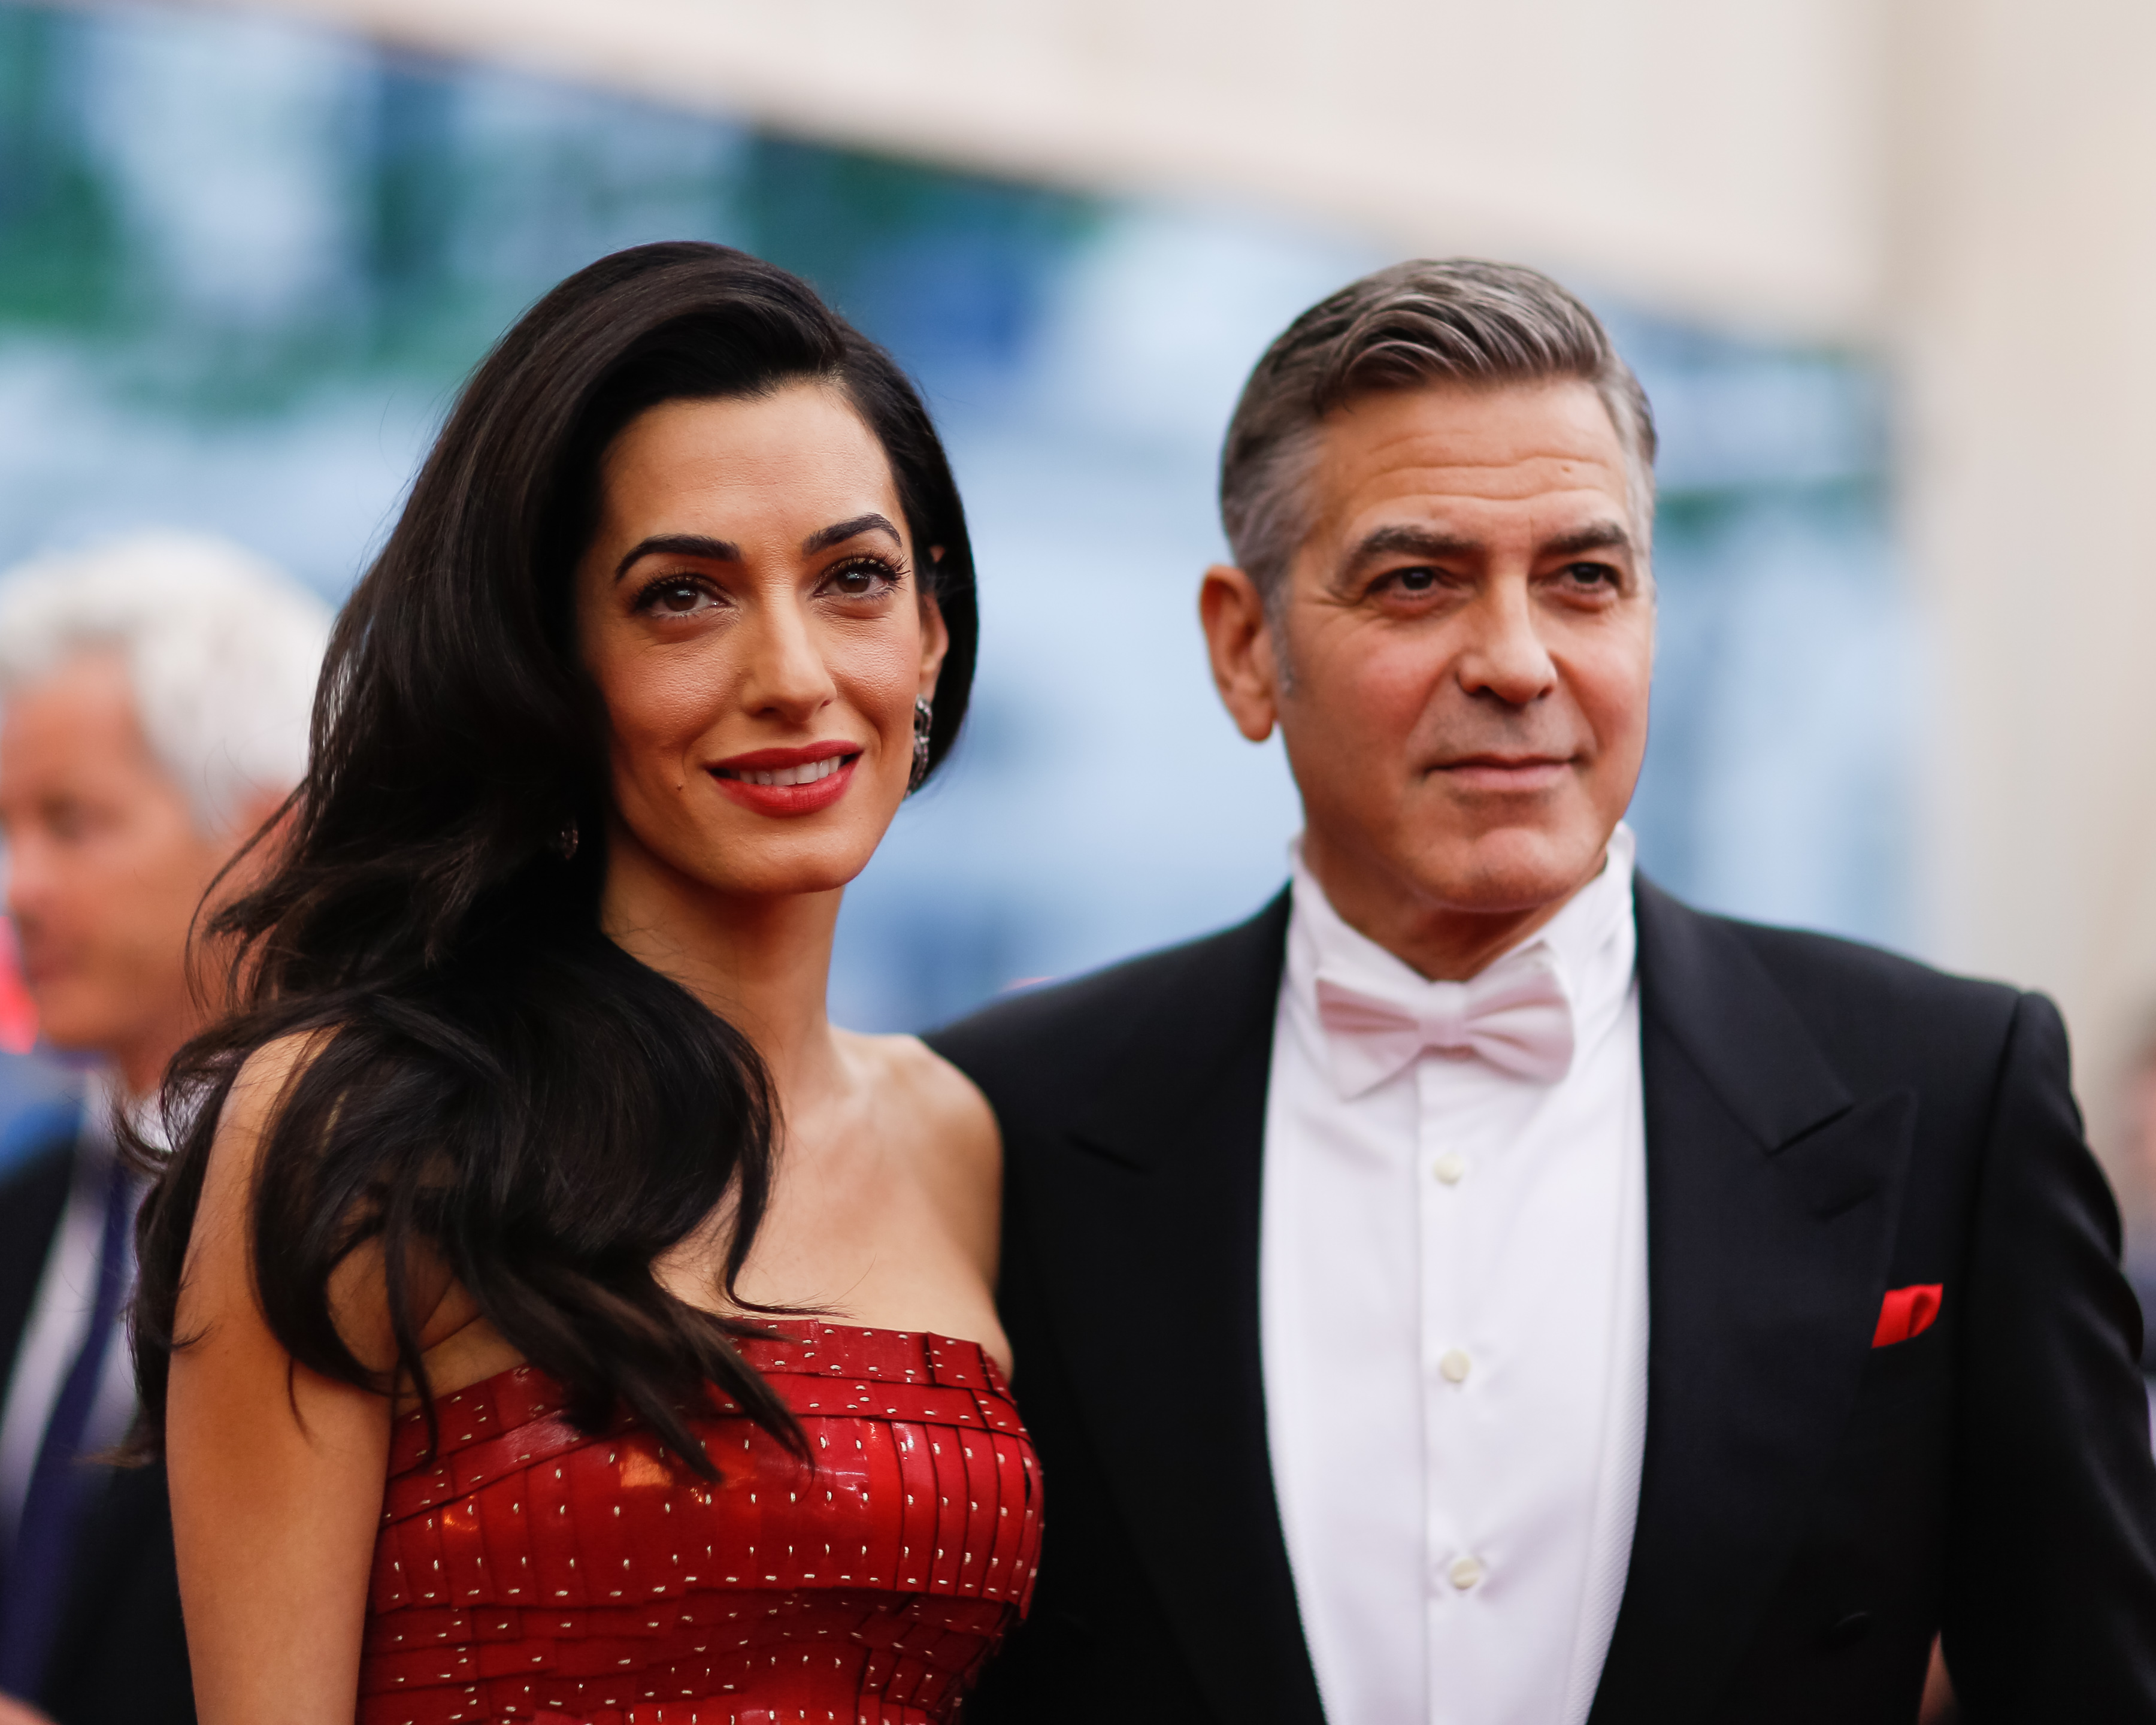 George Clooney and  Amal Alamuddin attend the Met Gala in New York City on May 4, 2015. (Julian Mackler—BFA/Sipa USA/AP)